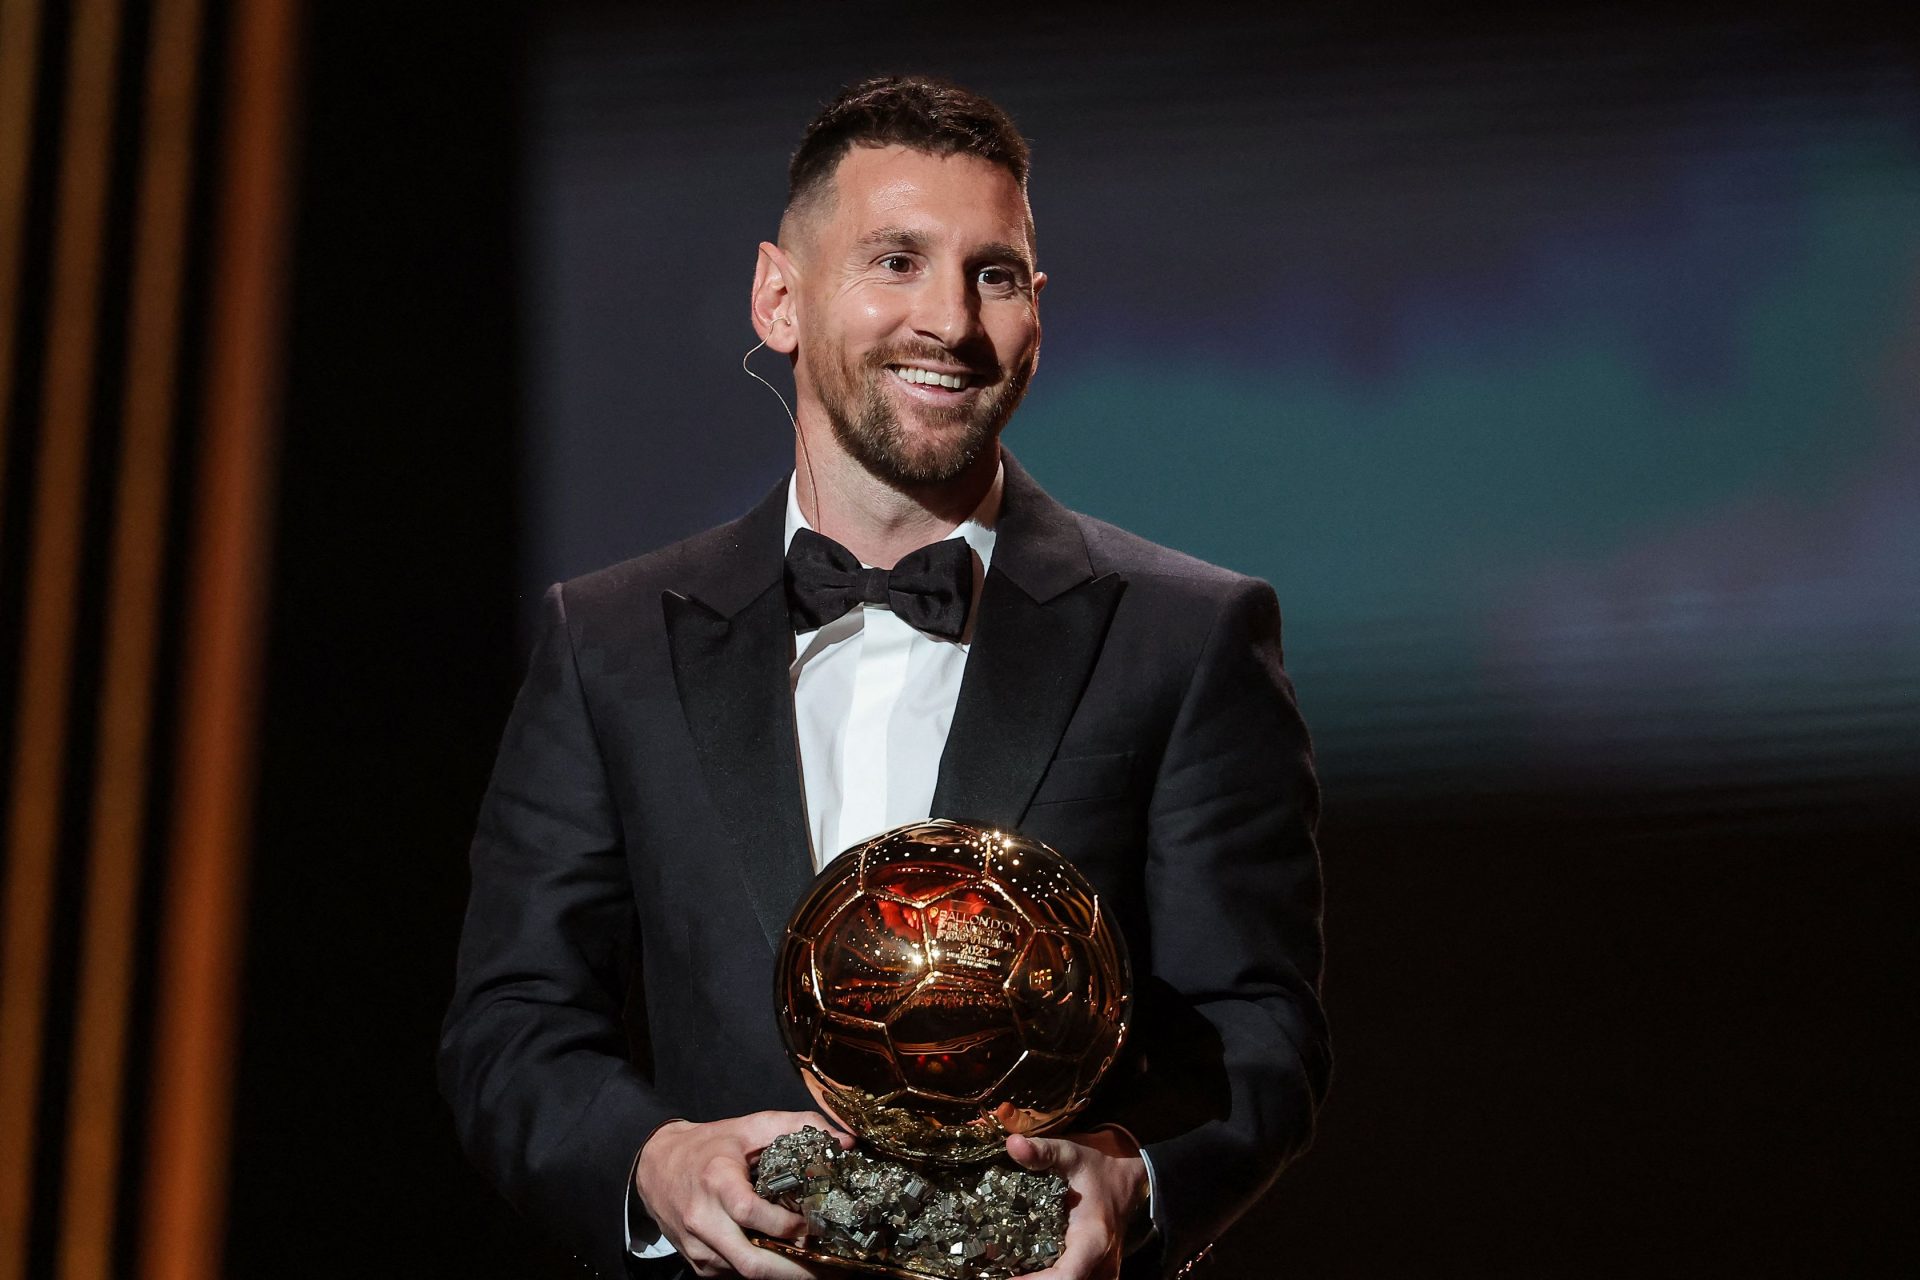 Is the football world biased towards Messi?